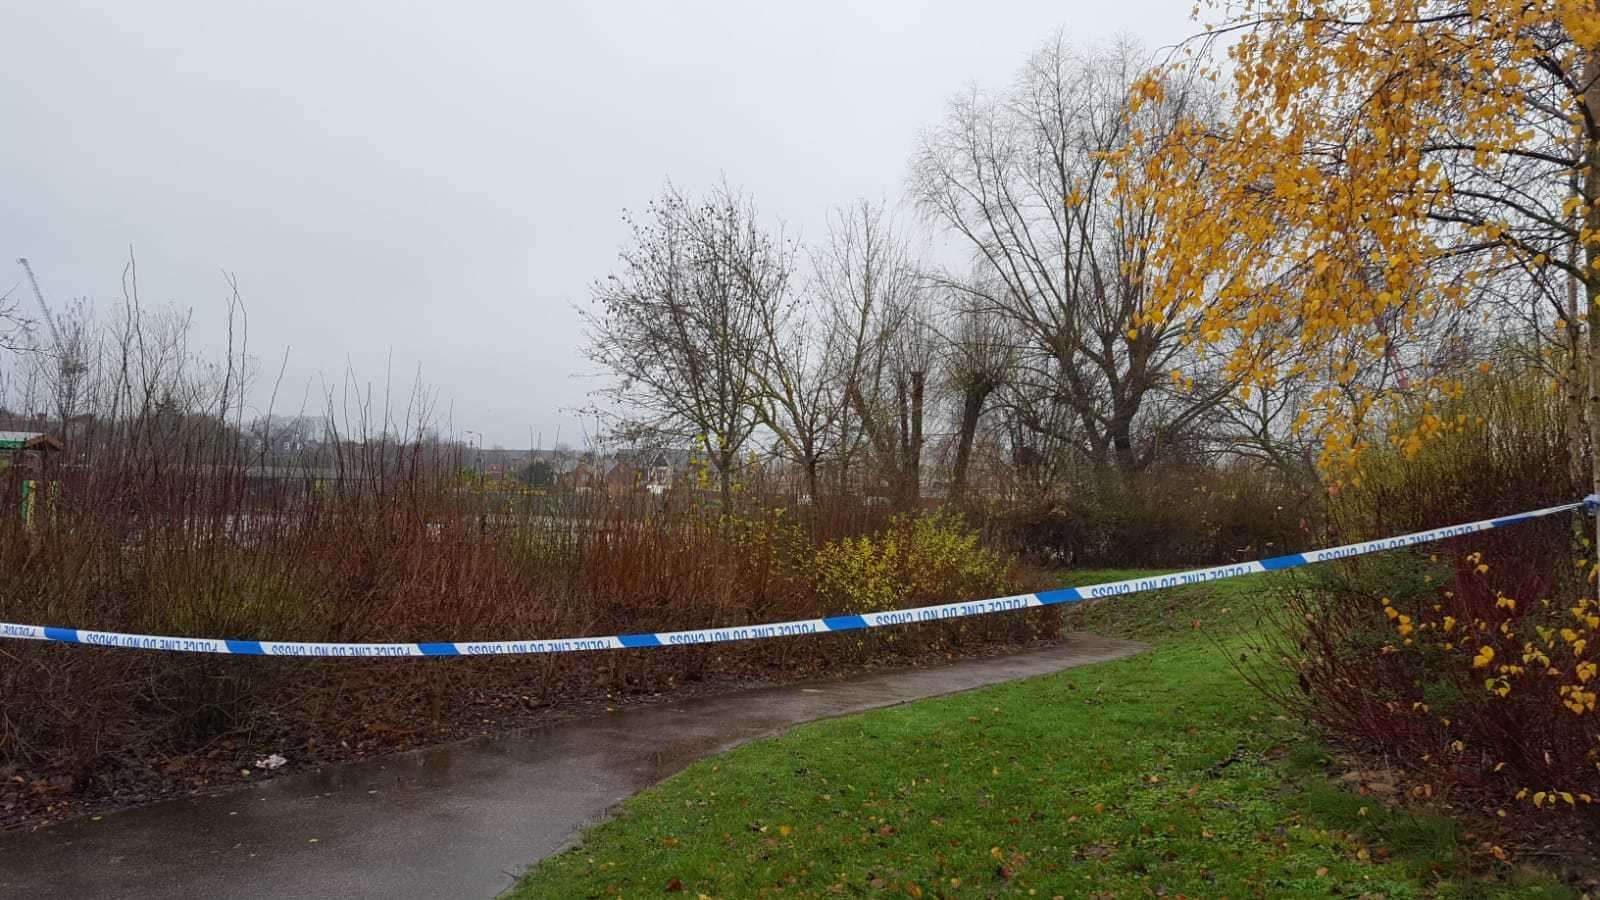 Police have taped off a section off path along the River Stour